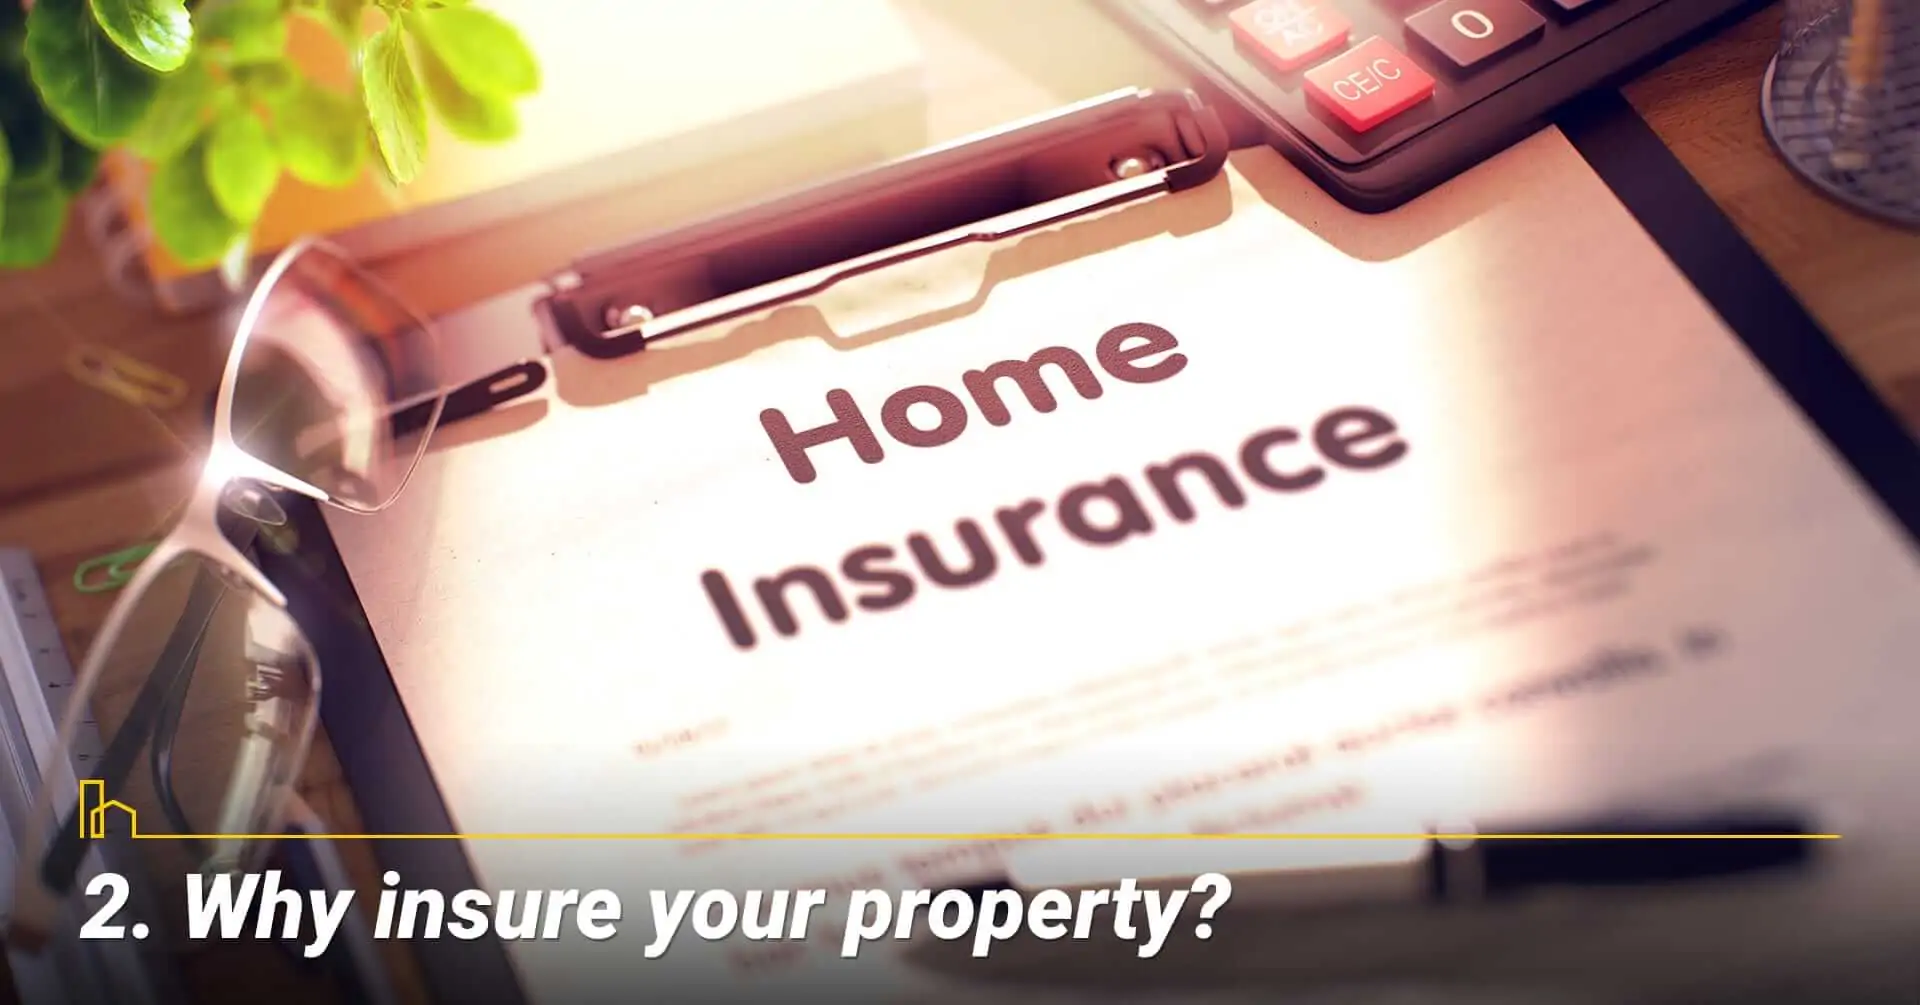 Why insure your property? Reasons to insure your home